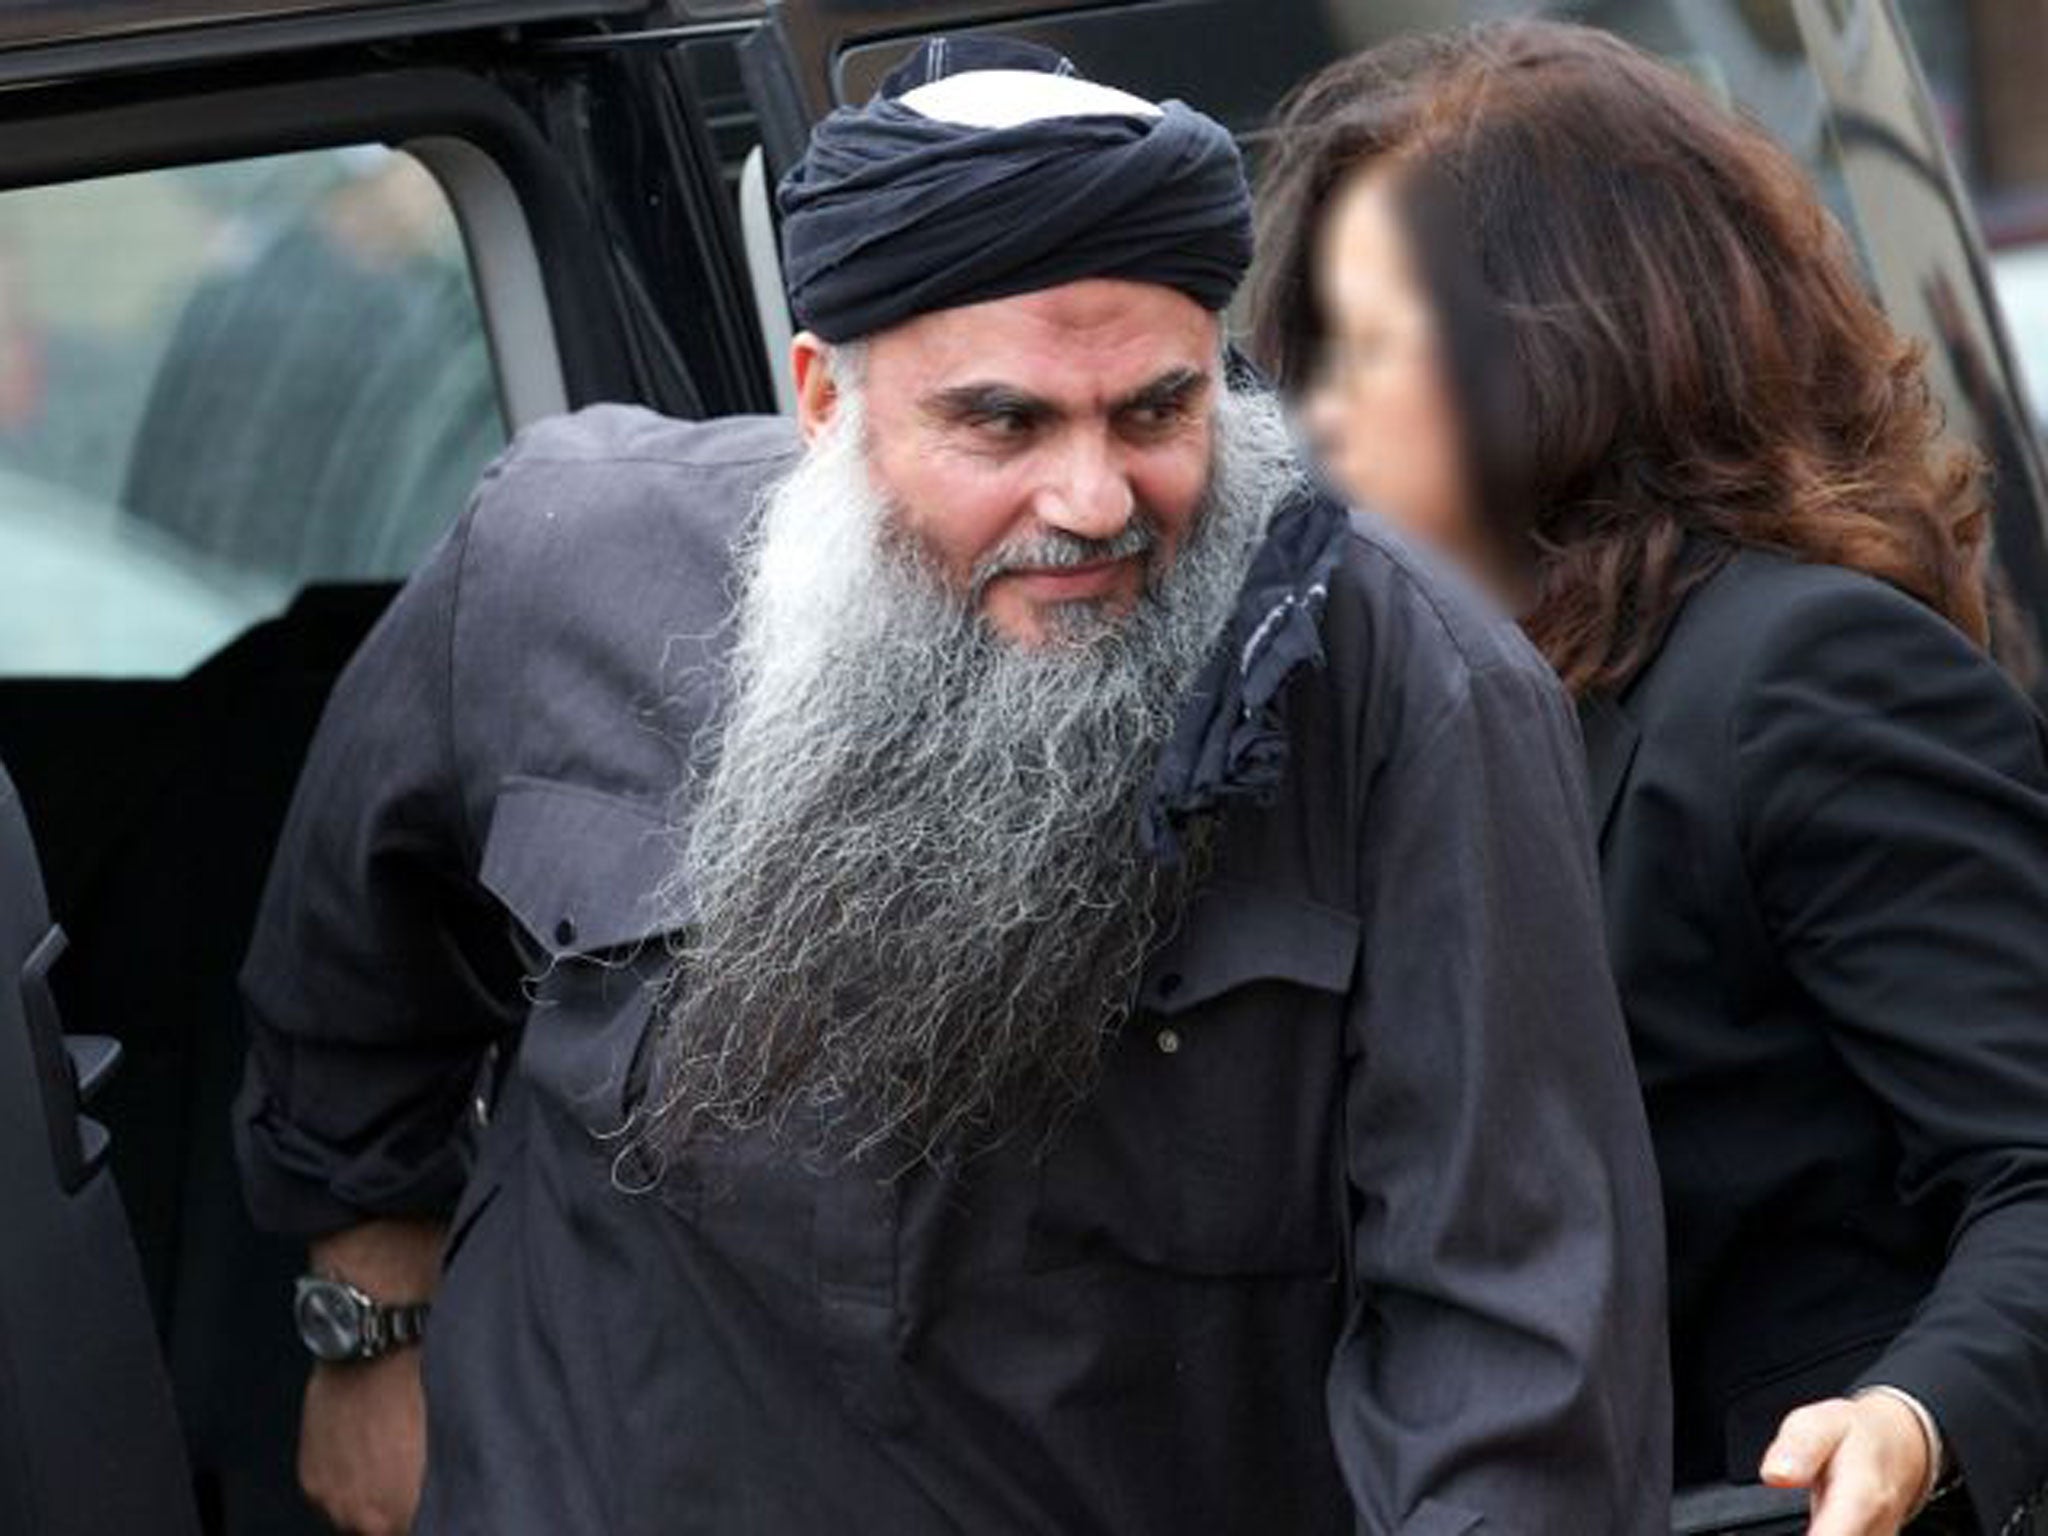 Jordanian terror suspect Abu Qatada arrives at his home in northwest London, after he was released from prison